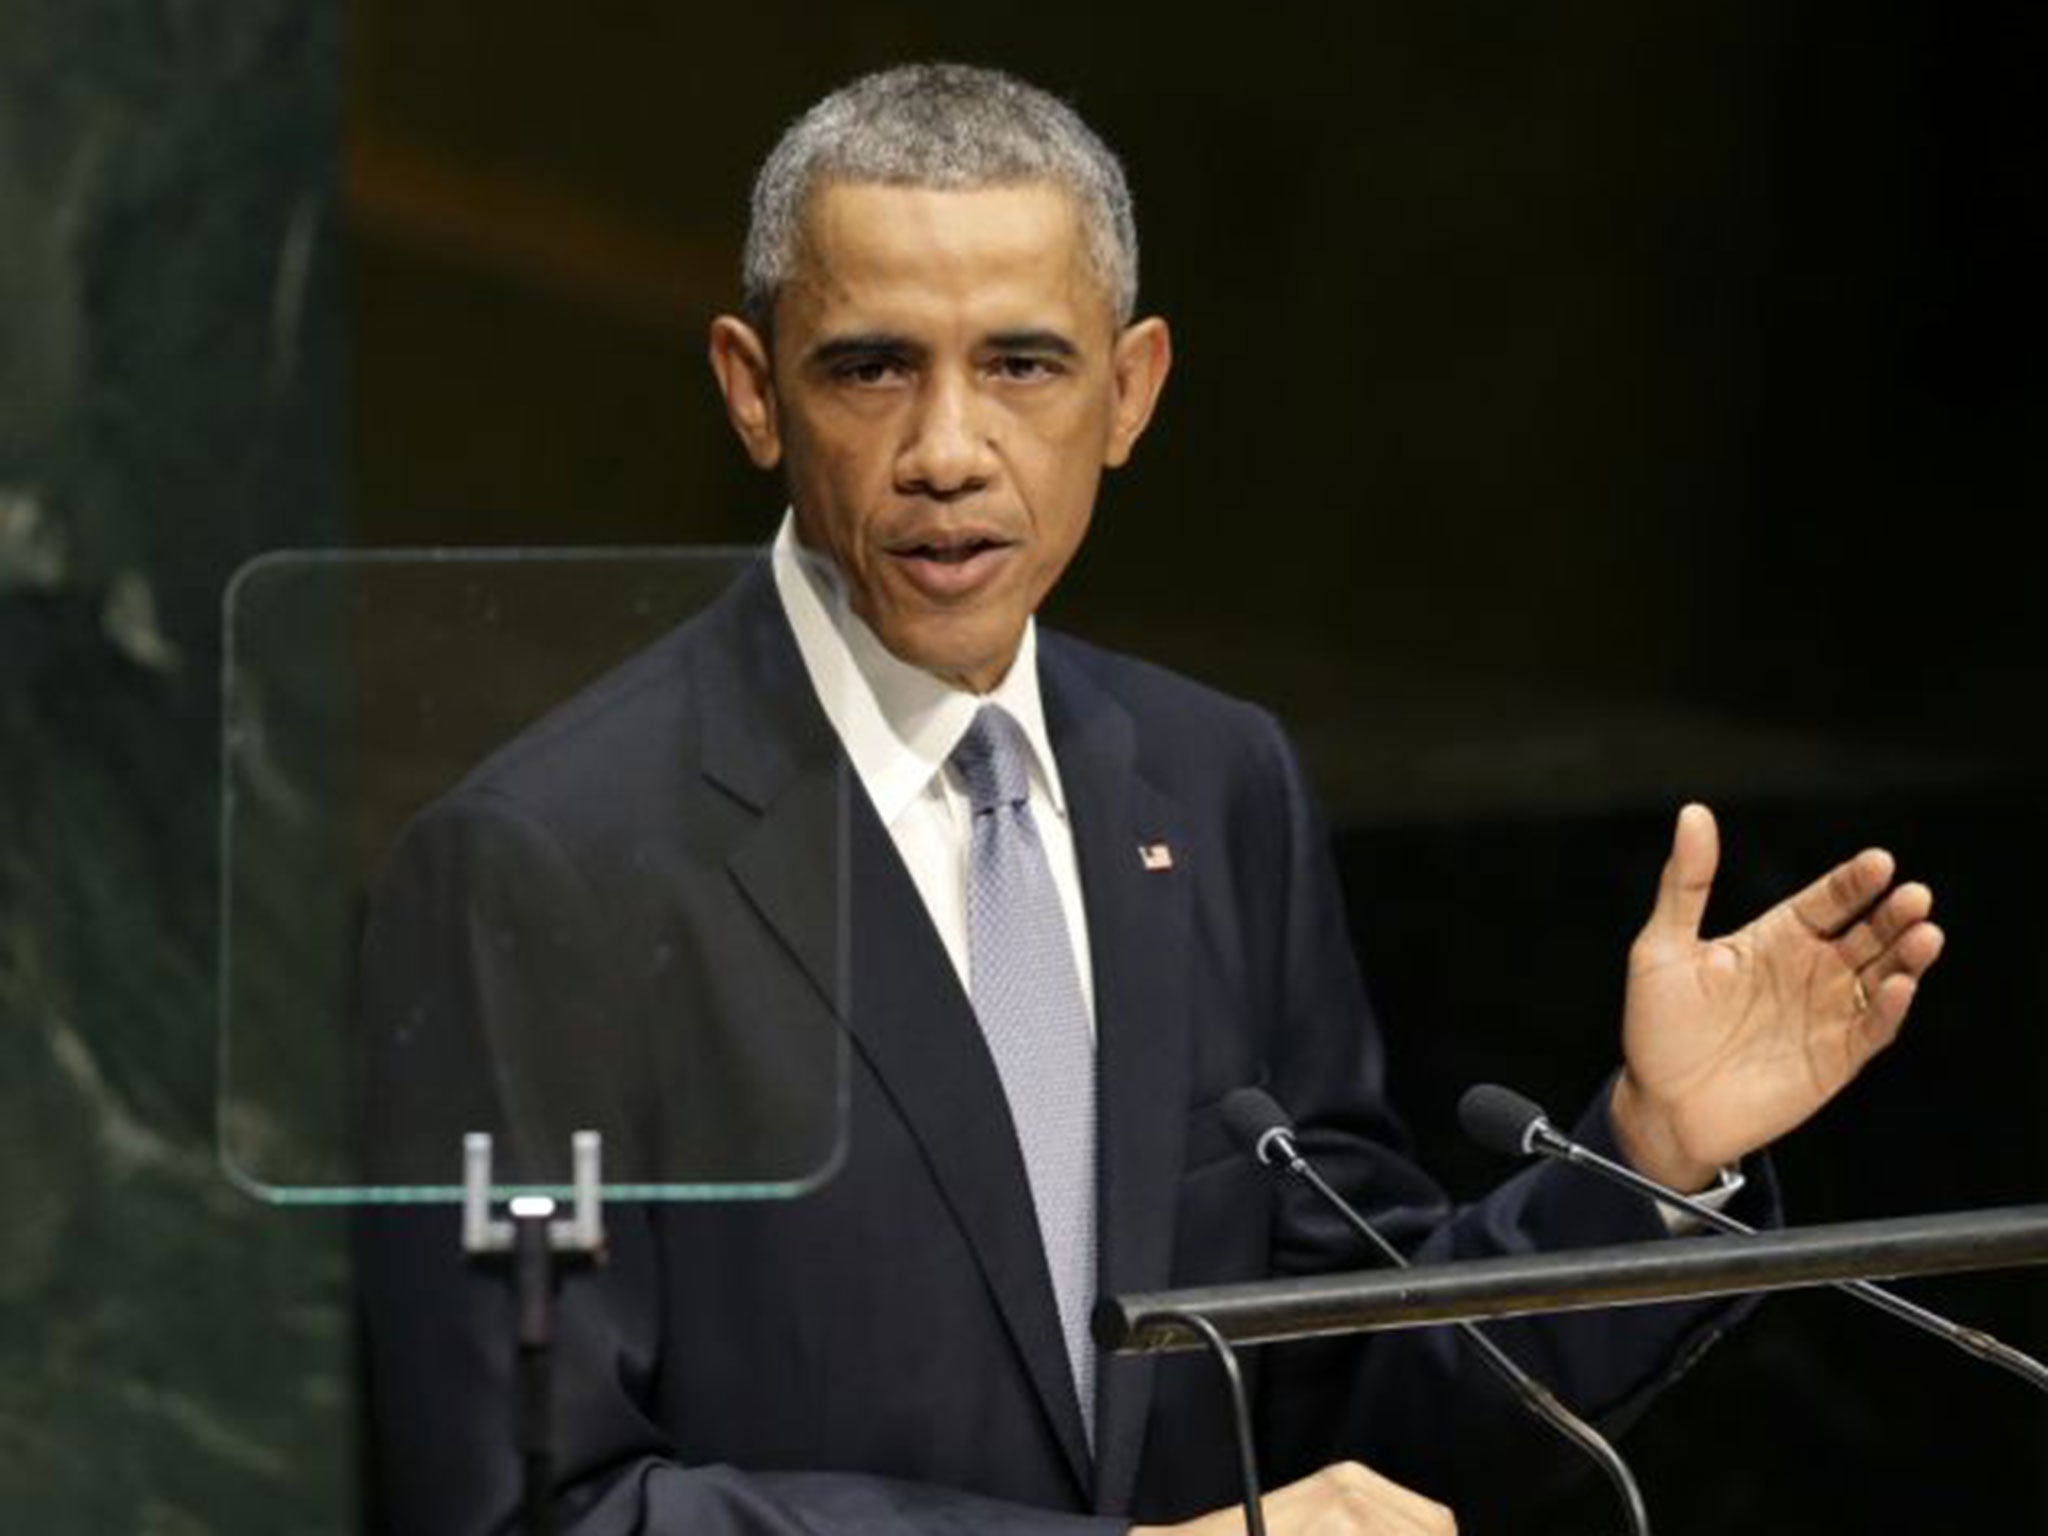 President Obama spoke during the 69th session of the United Nations General Assembly at the U.N. headquarters